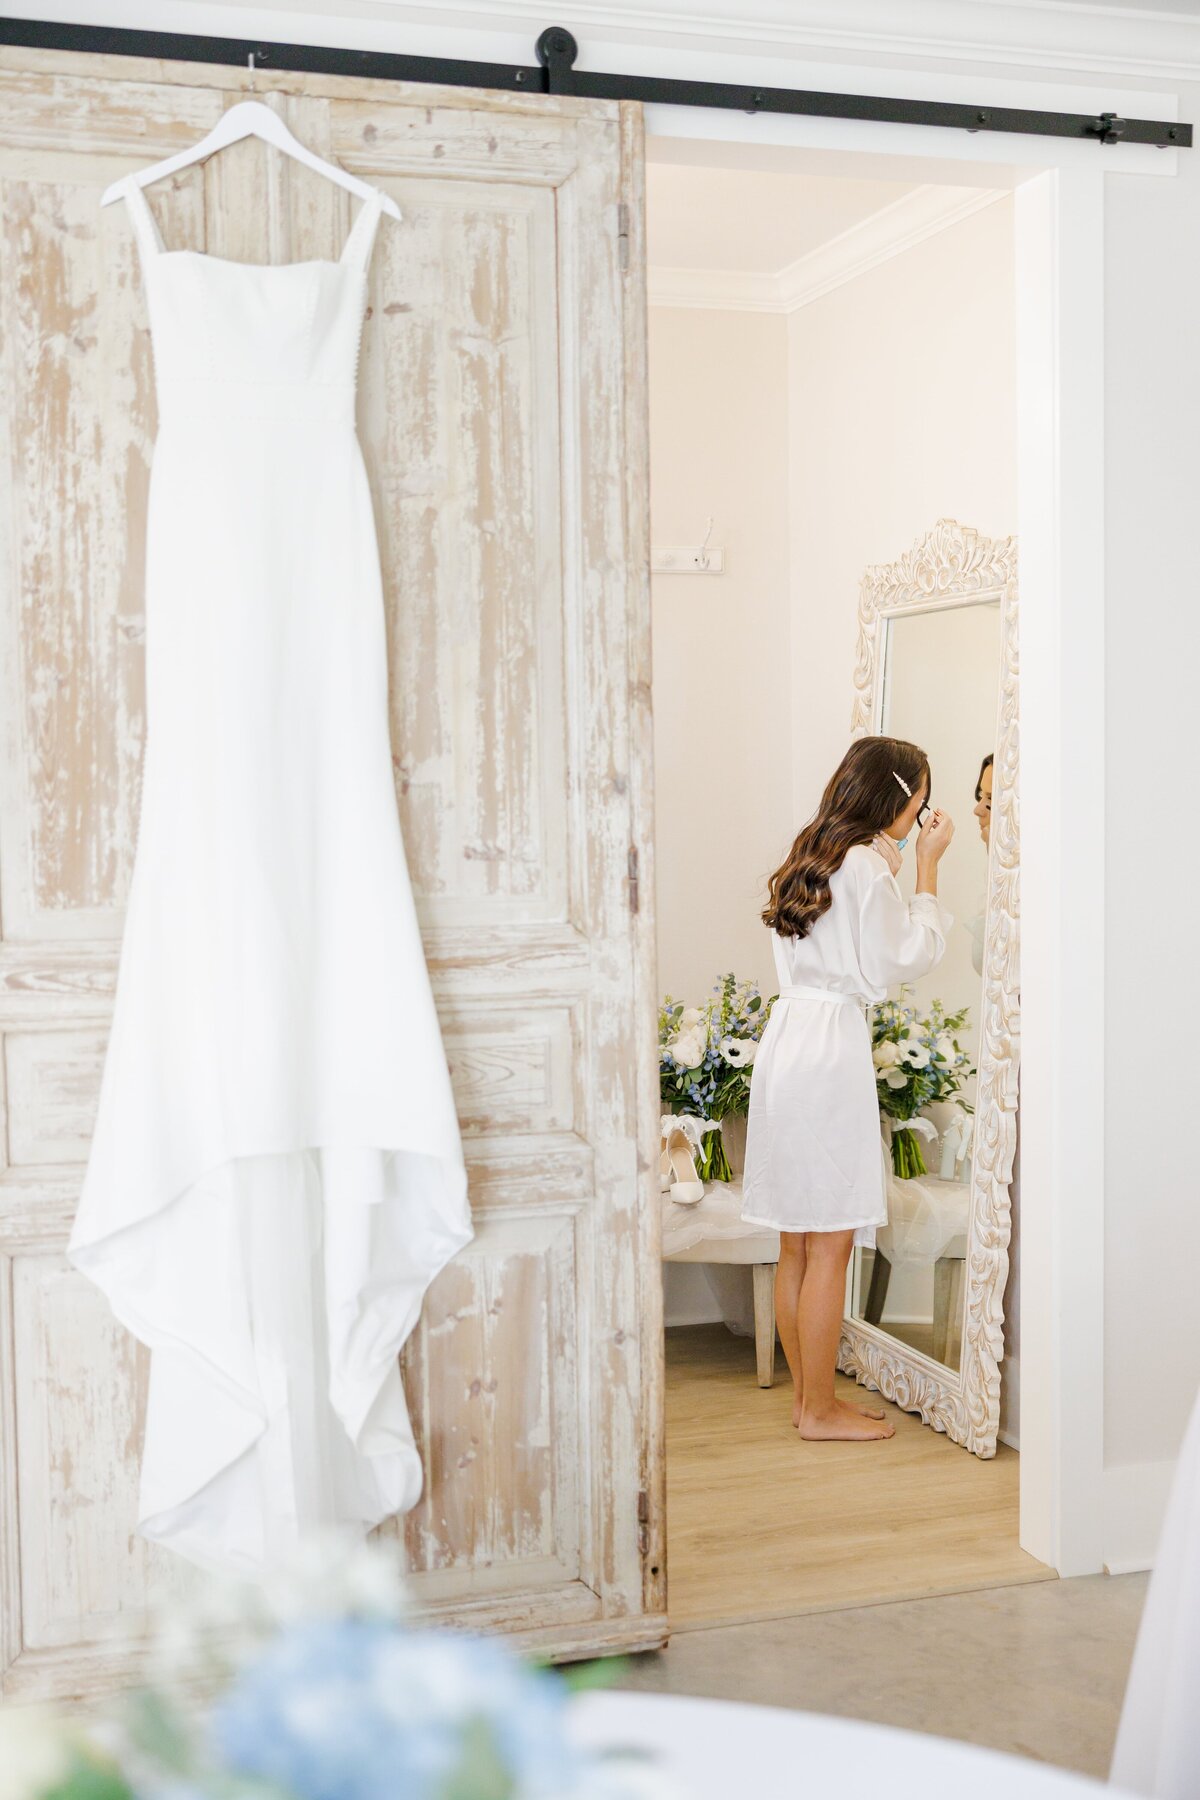 A bride stands in her robe putting on makeup with her wedding dress hanging on the door.